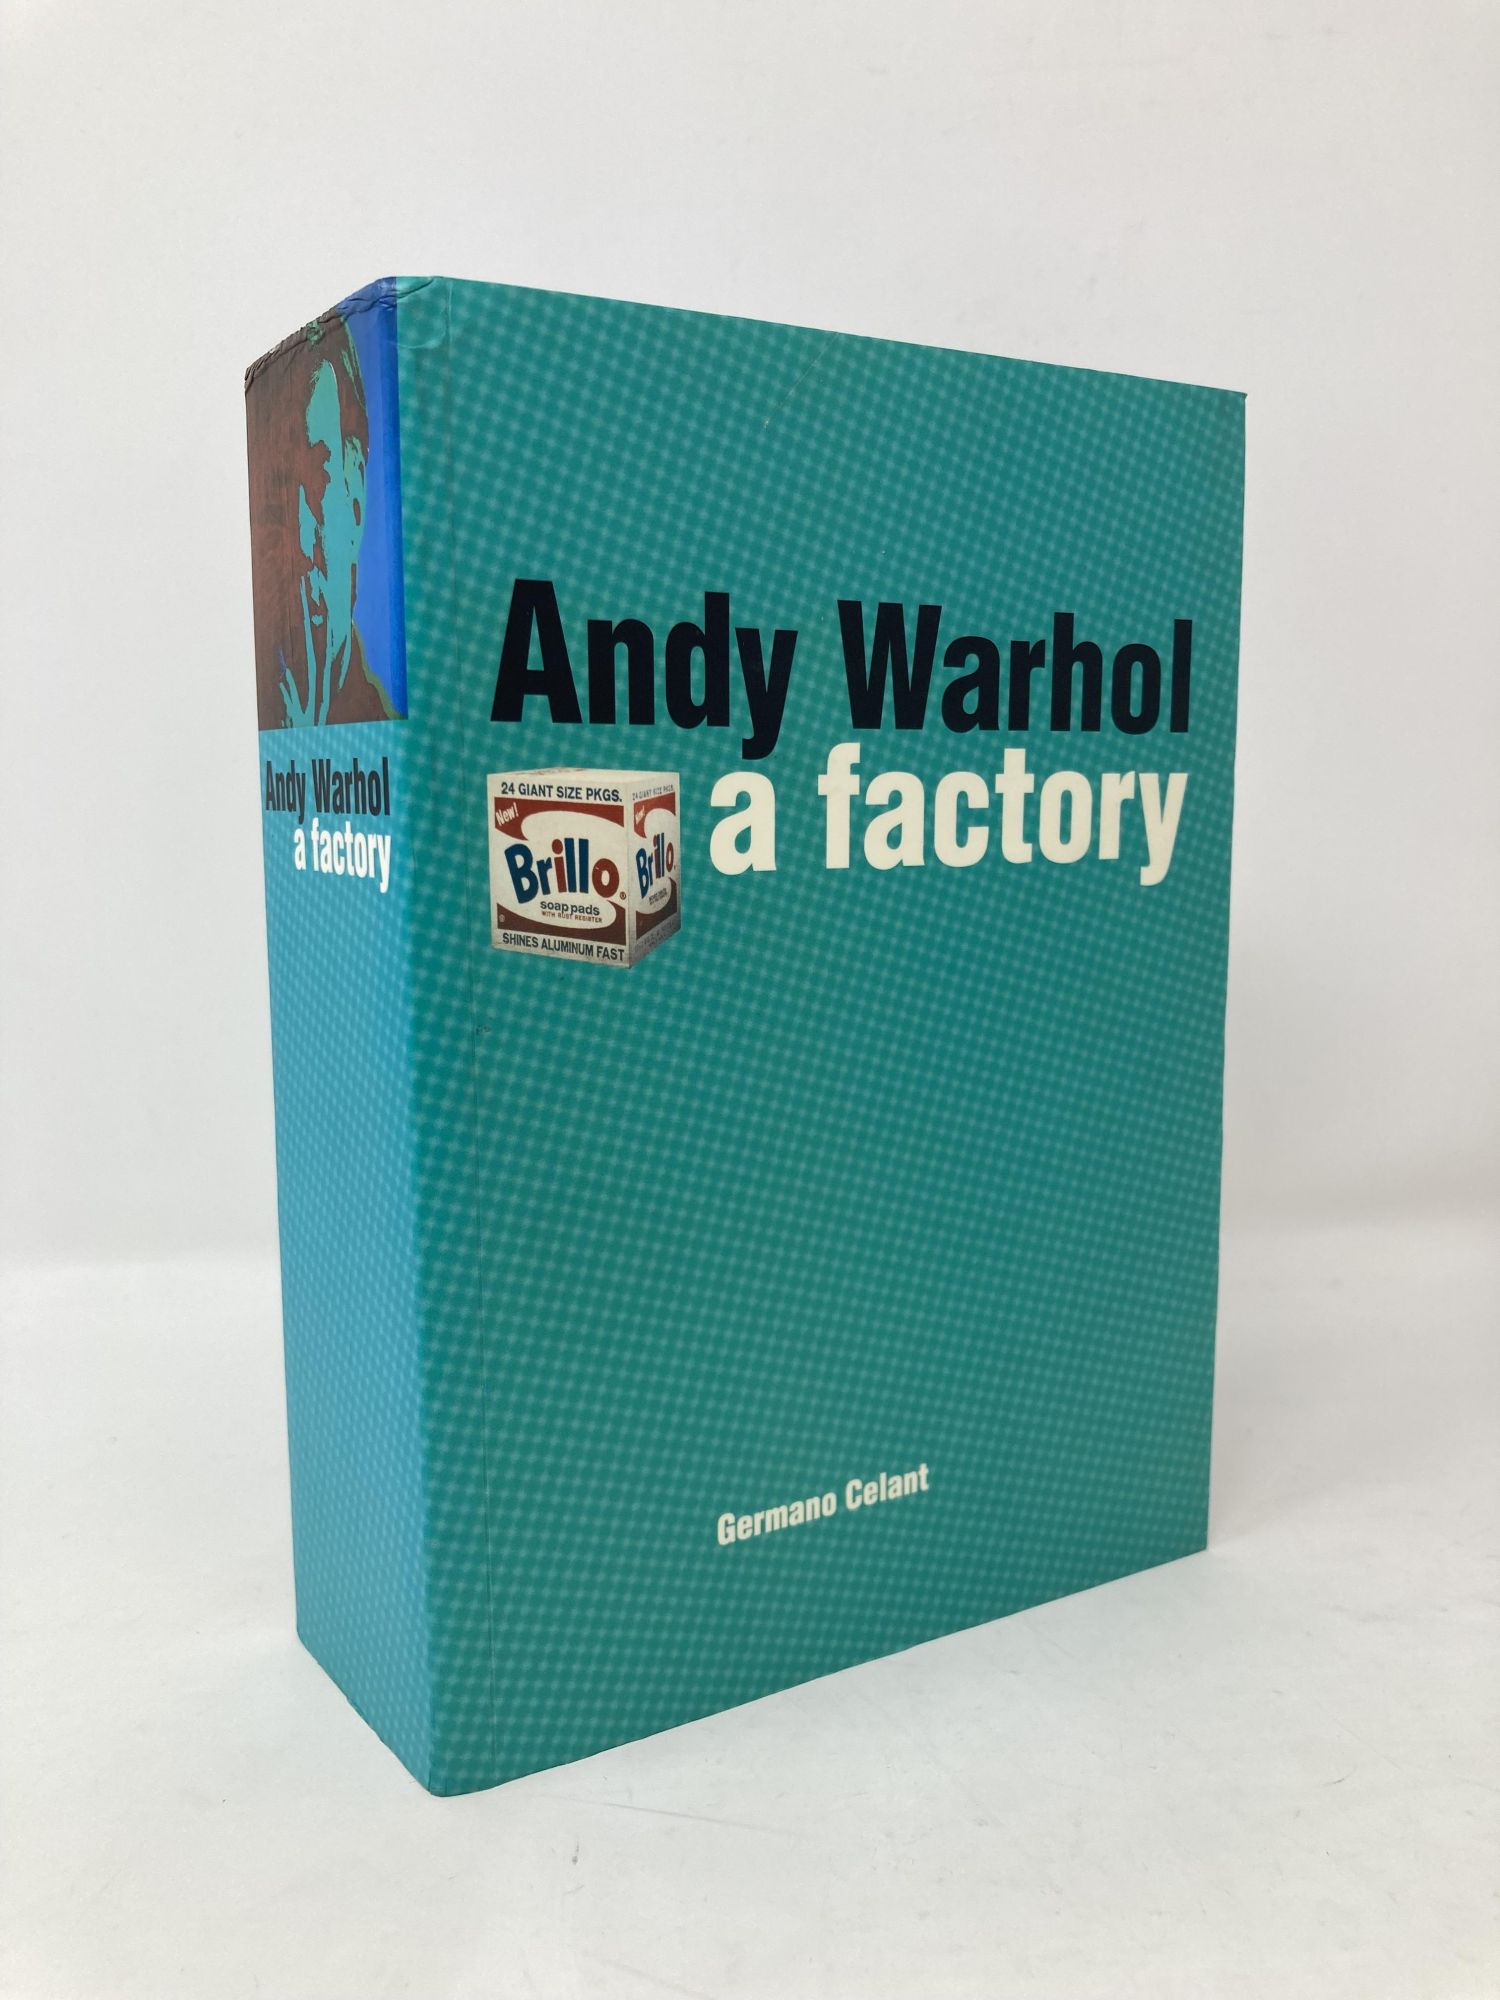 Andy Warhol-A Factory - Celant, Germano